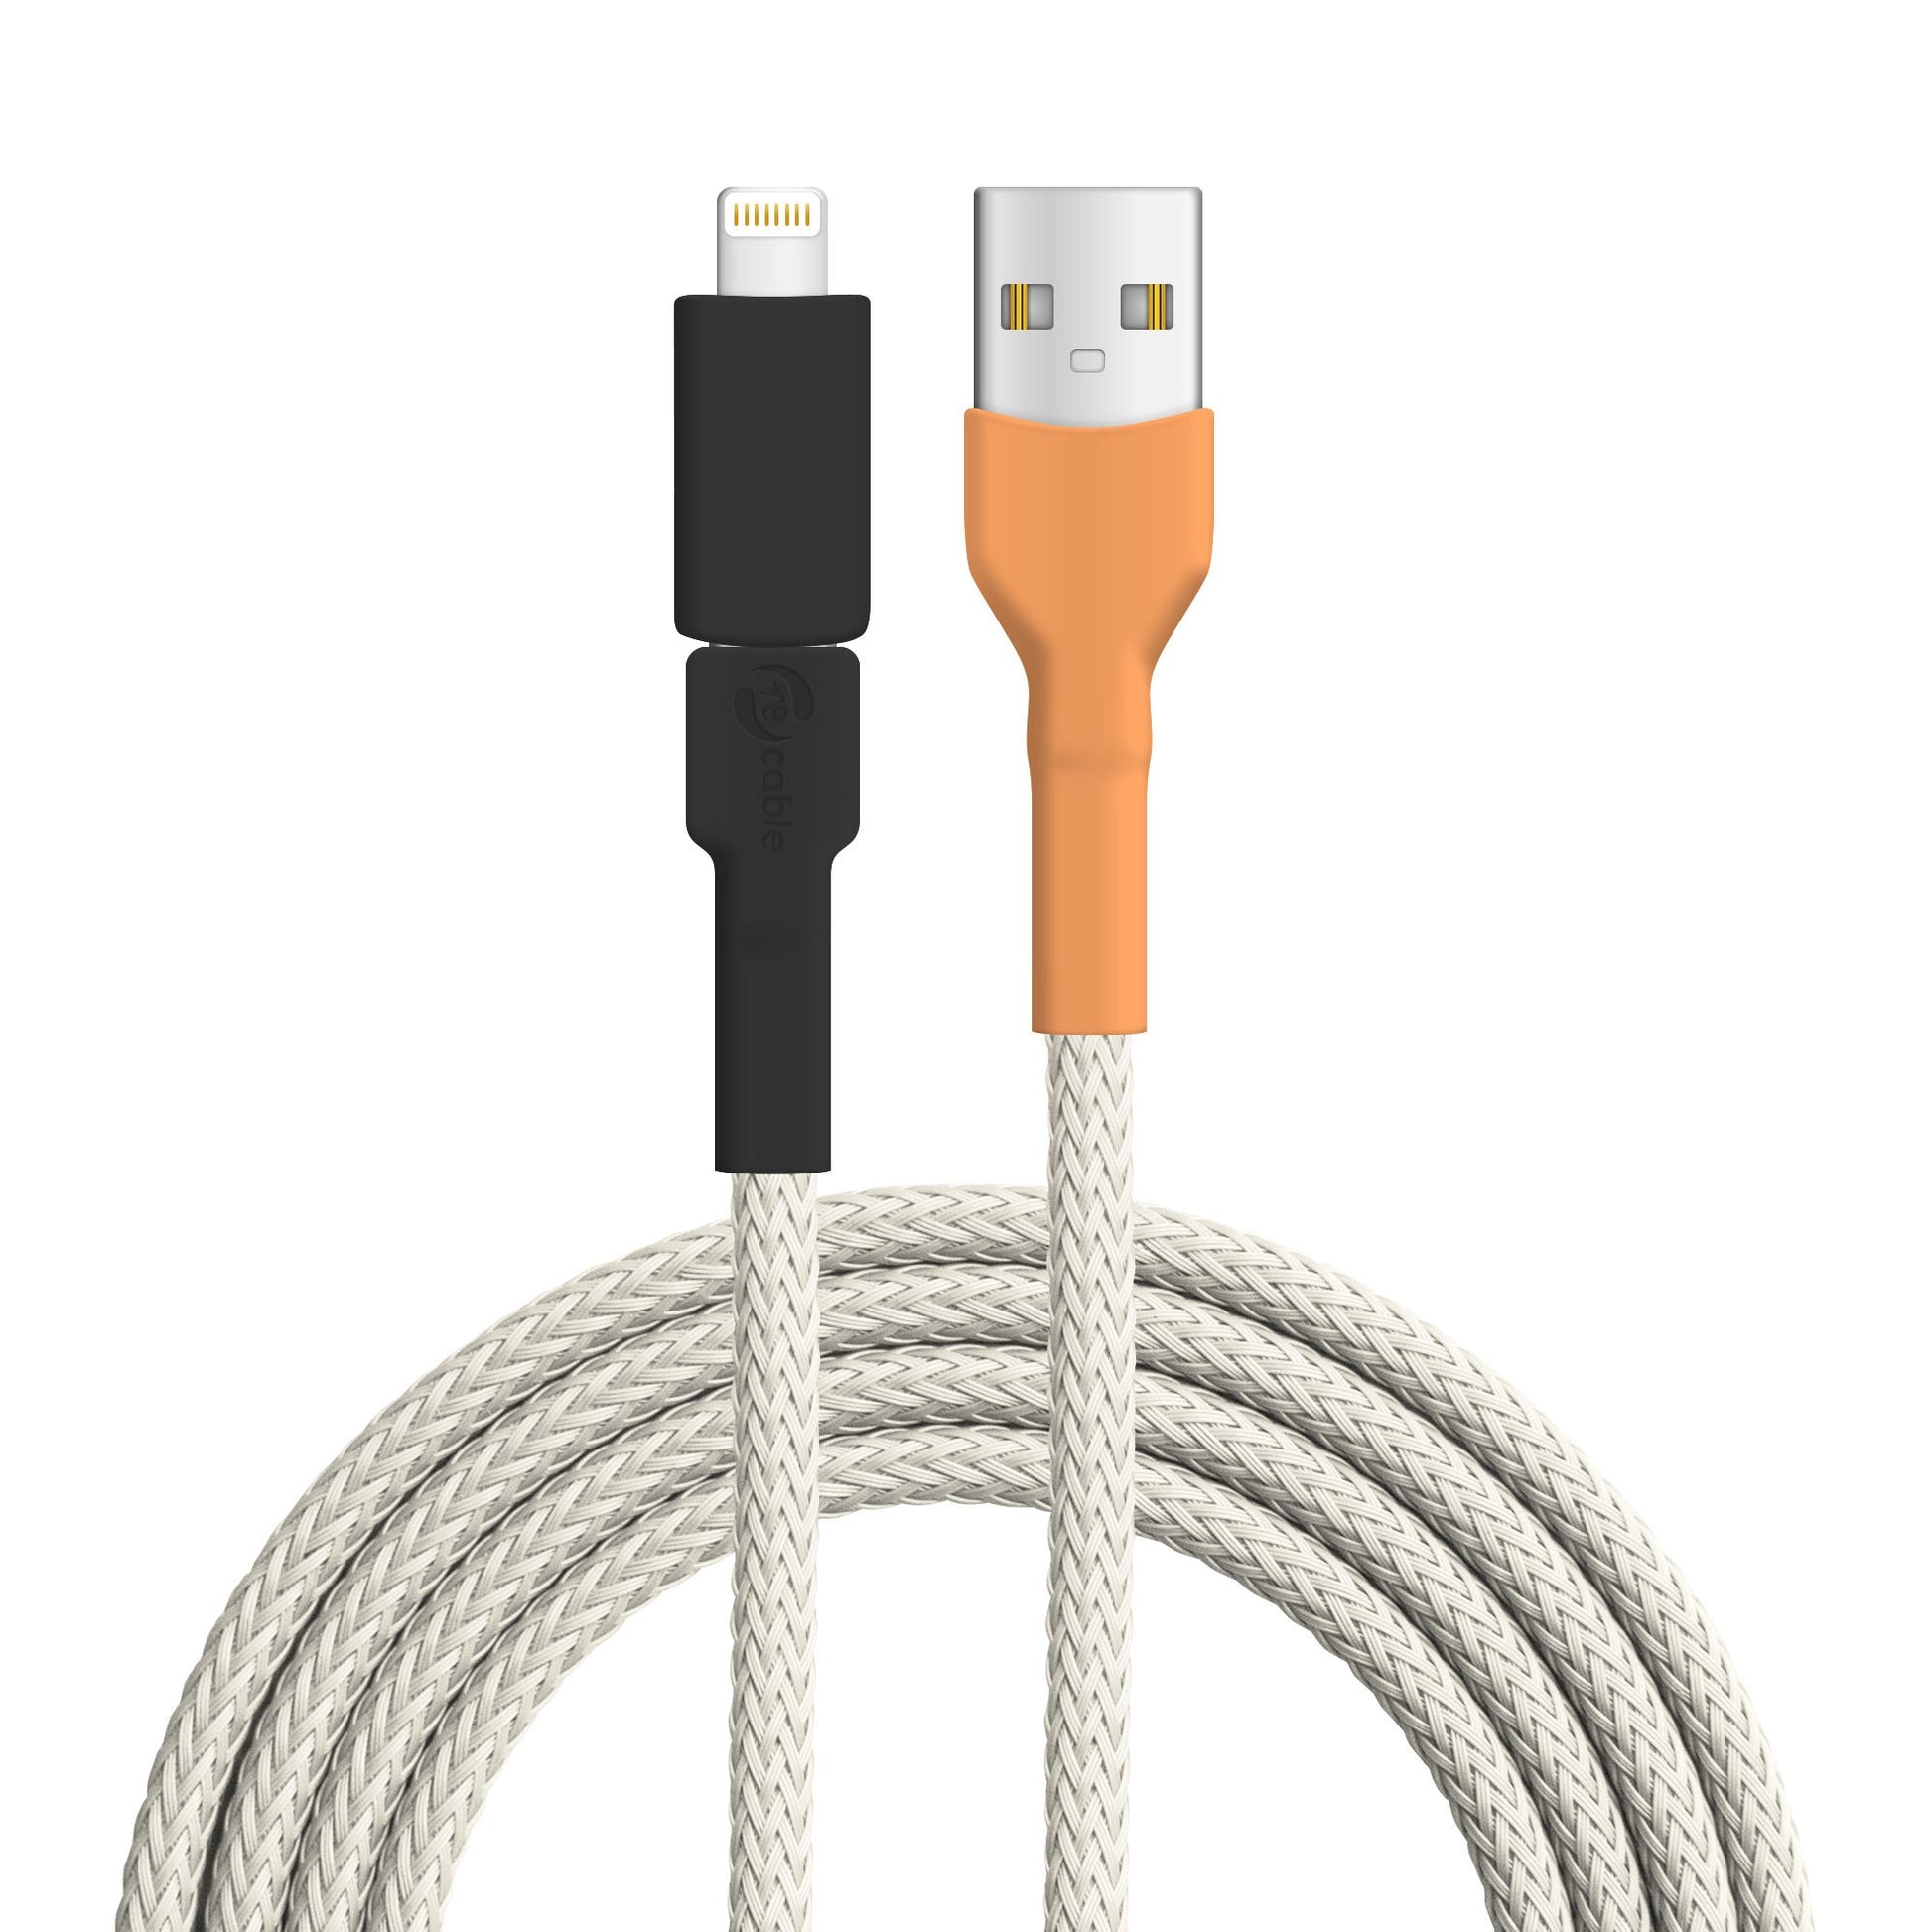 USB cable, Design: King penguin, Connectors: USB A to Micro-USB with Lightning adapter (connected)